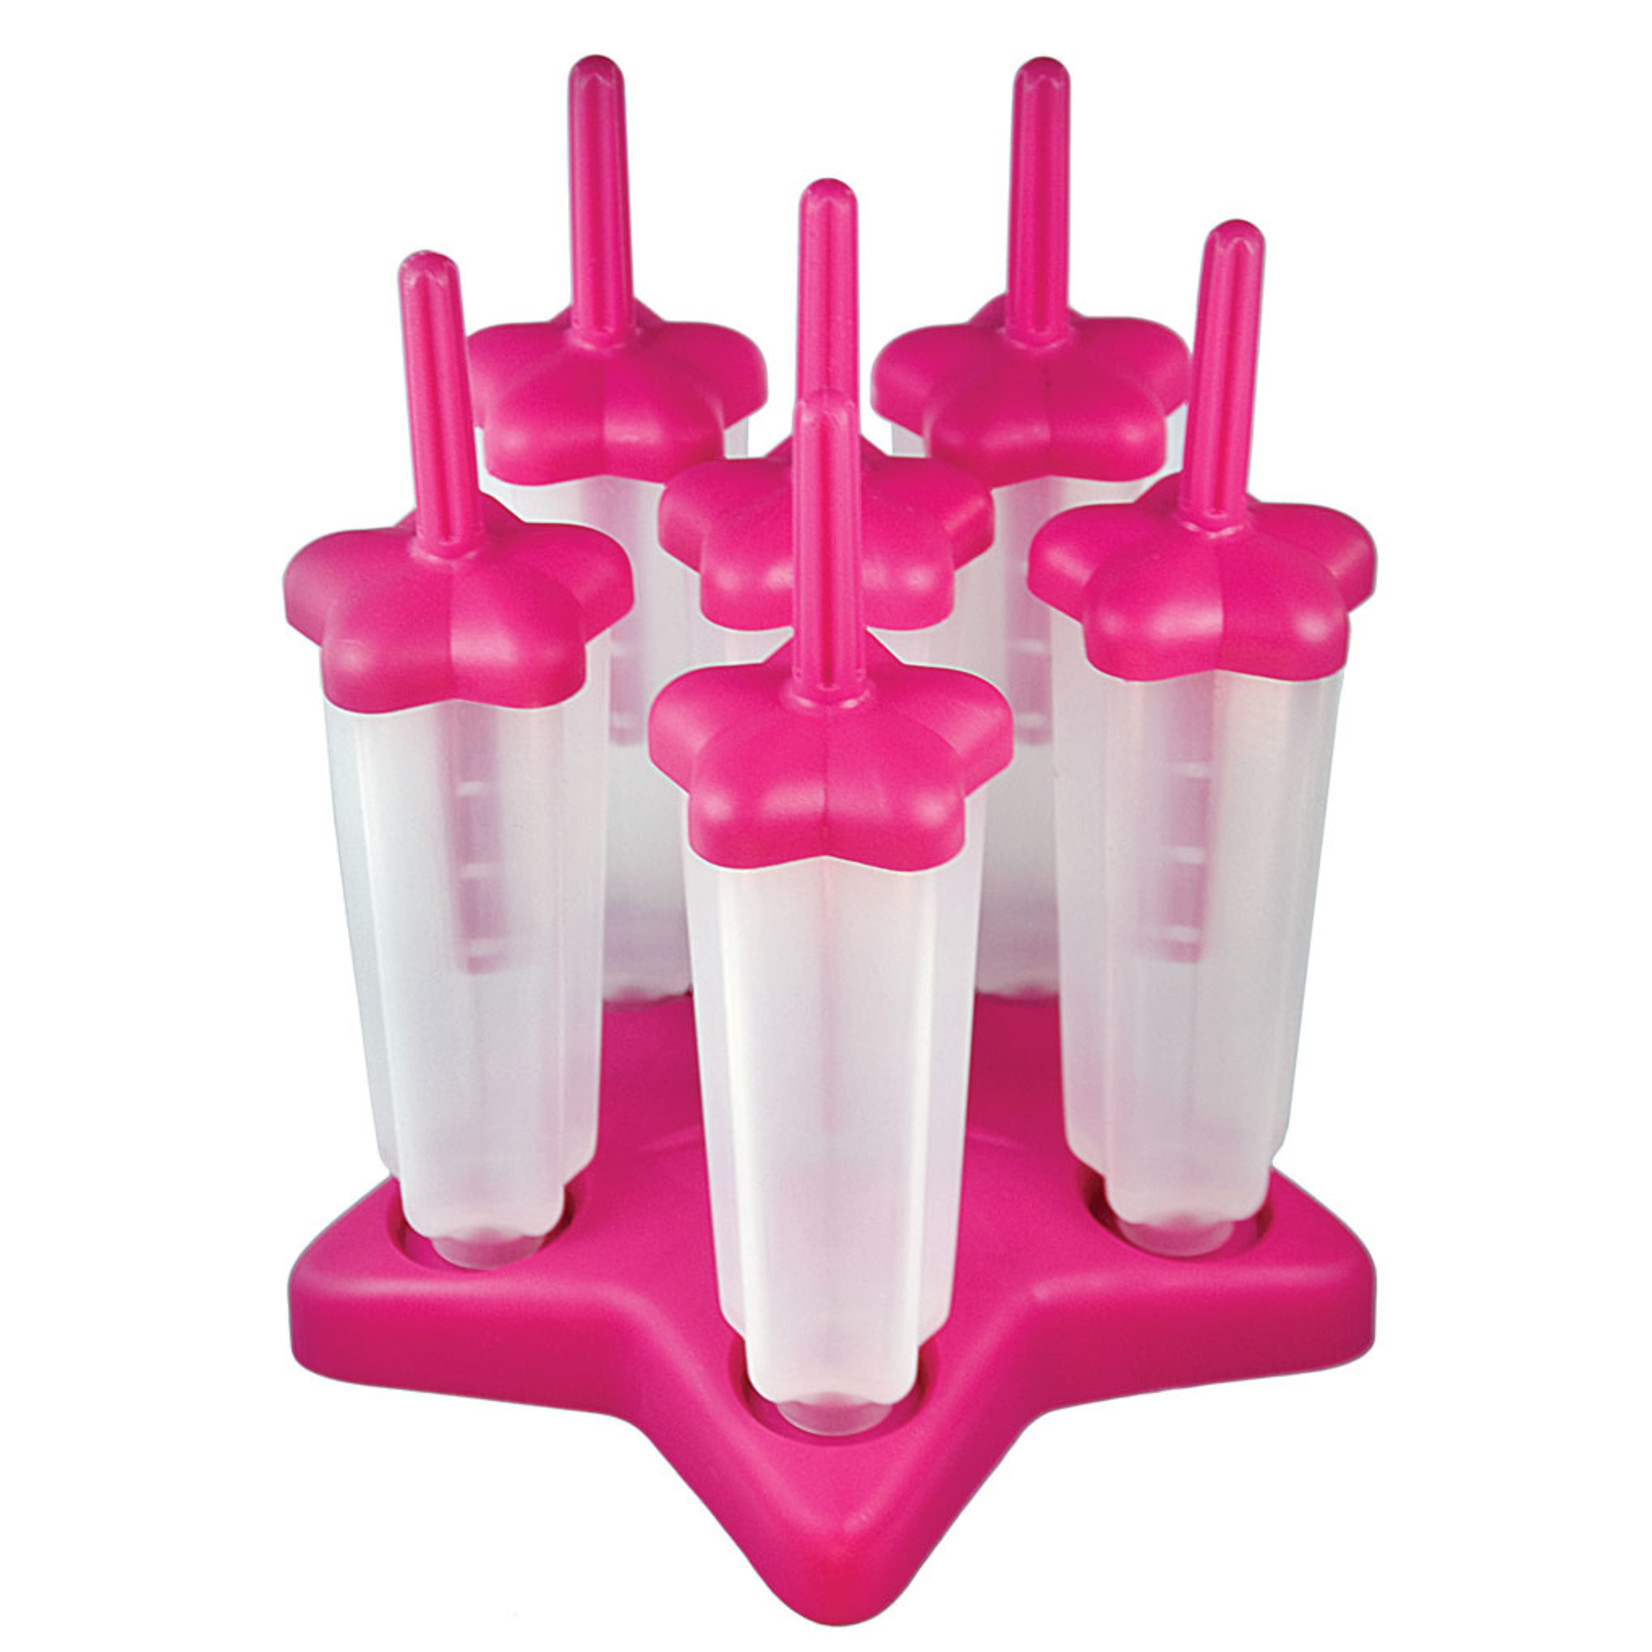 TOVOLO TOVOLO Star Pop Molds S/6 - Pink DNR